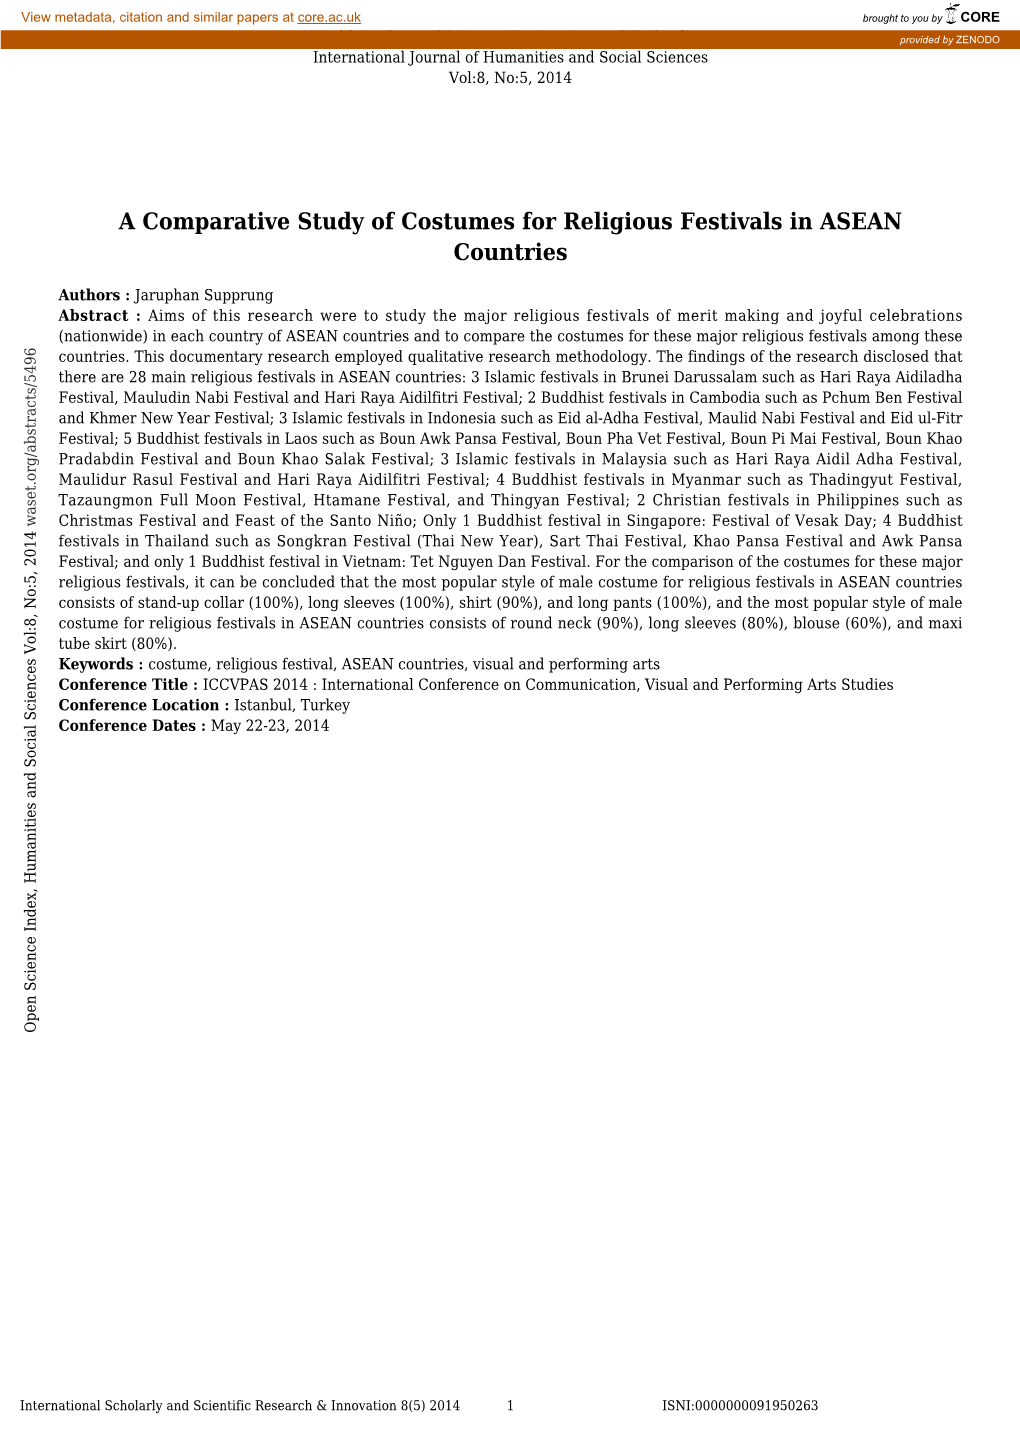 A Comparative Study of Costumes for Religious Festivals in ASEAN Countries